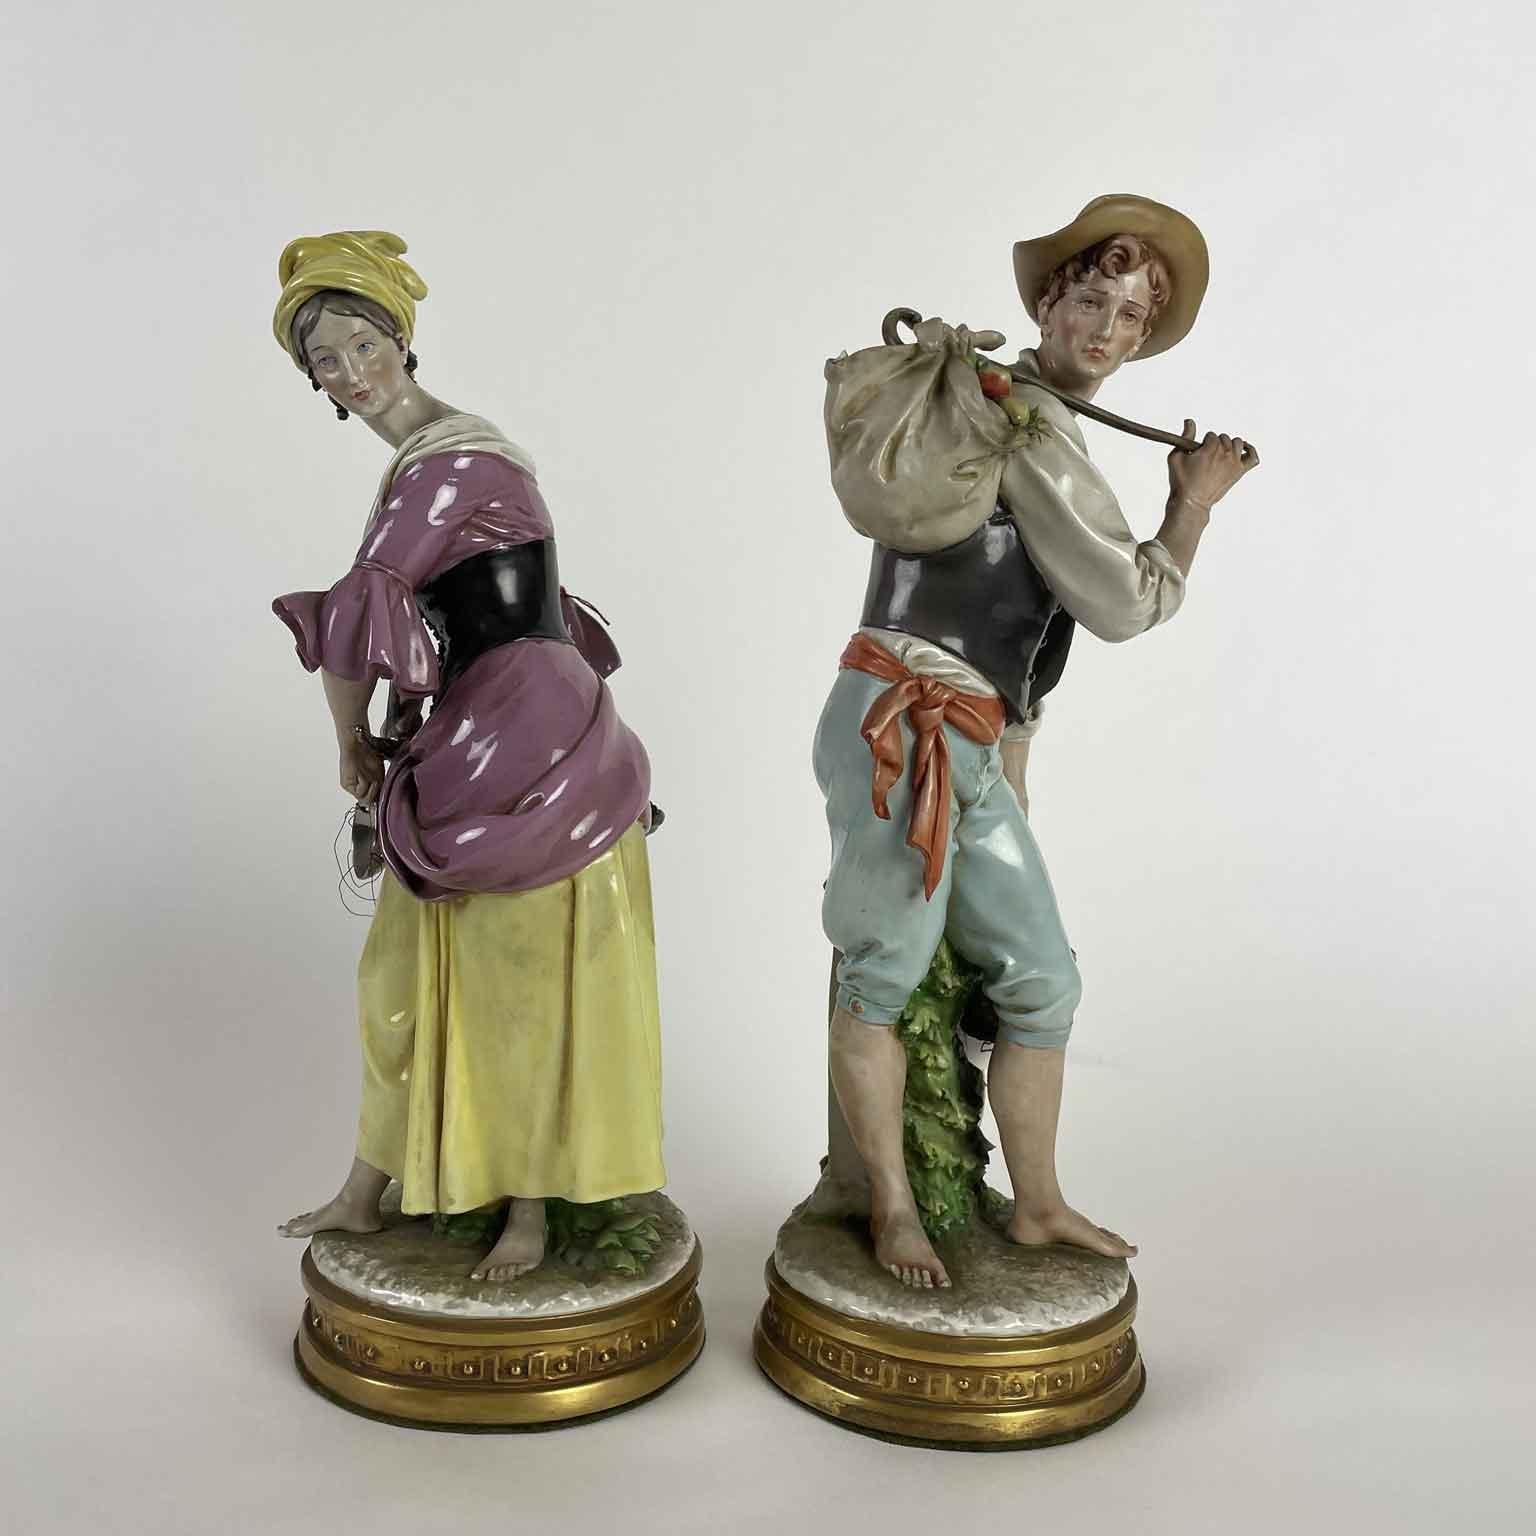 Pair of hand-painted polychrome porcelain sculptures depicting the allegory of abundance, two peasants, a girl and a young boy, holding fruit and grapes baskets. 
Both porcelain figures have wonderful details stand on a golden circular base,